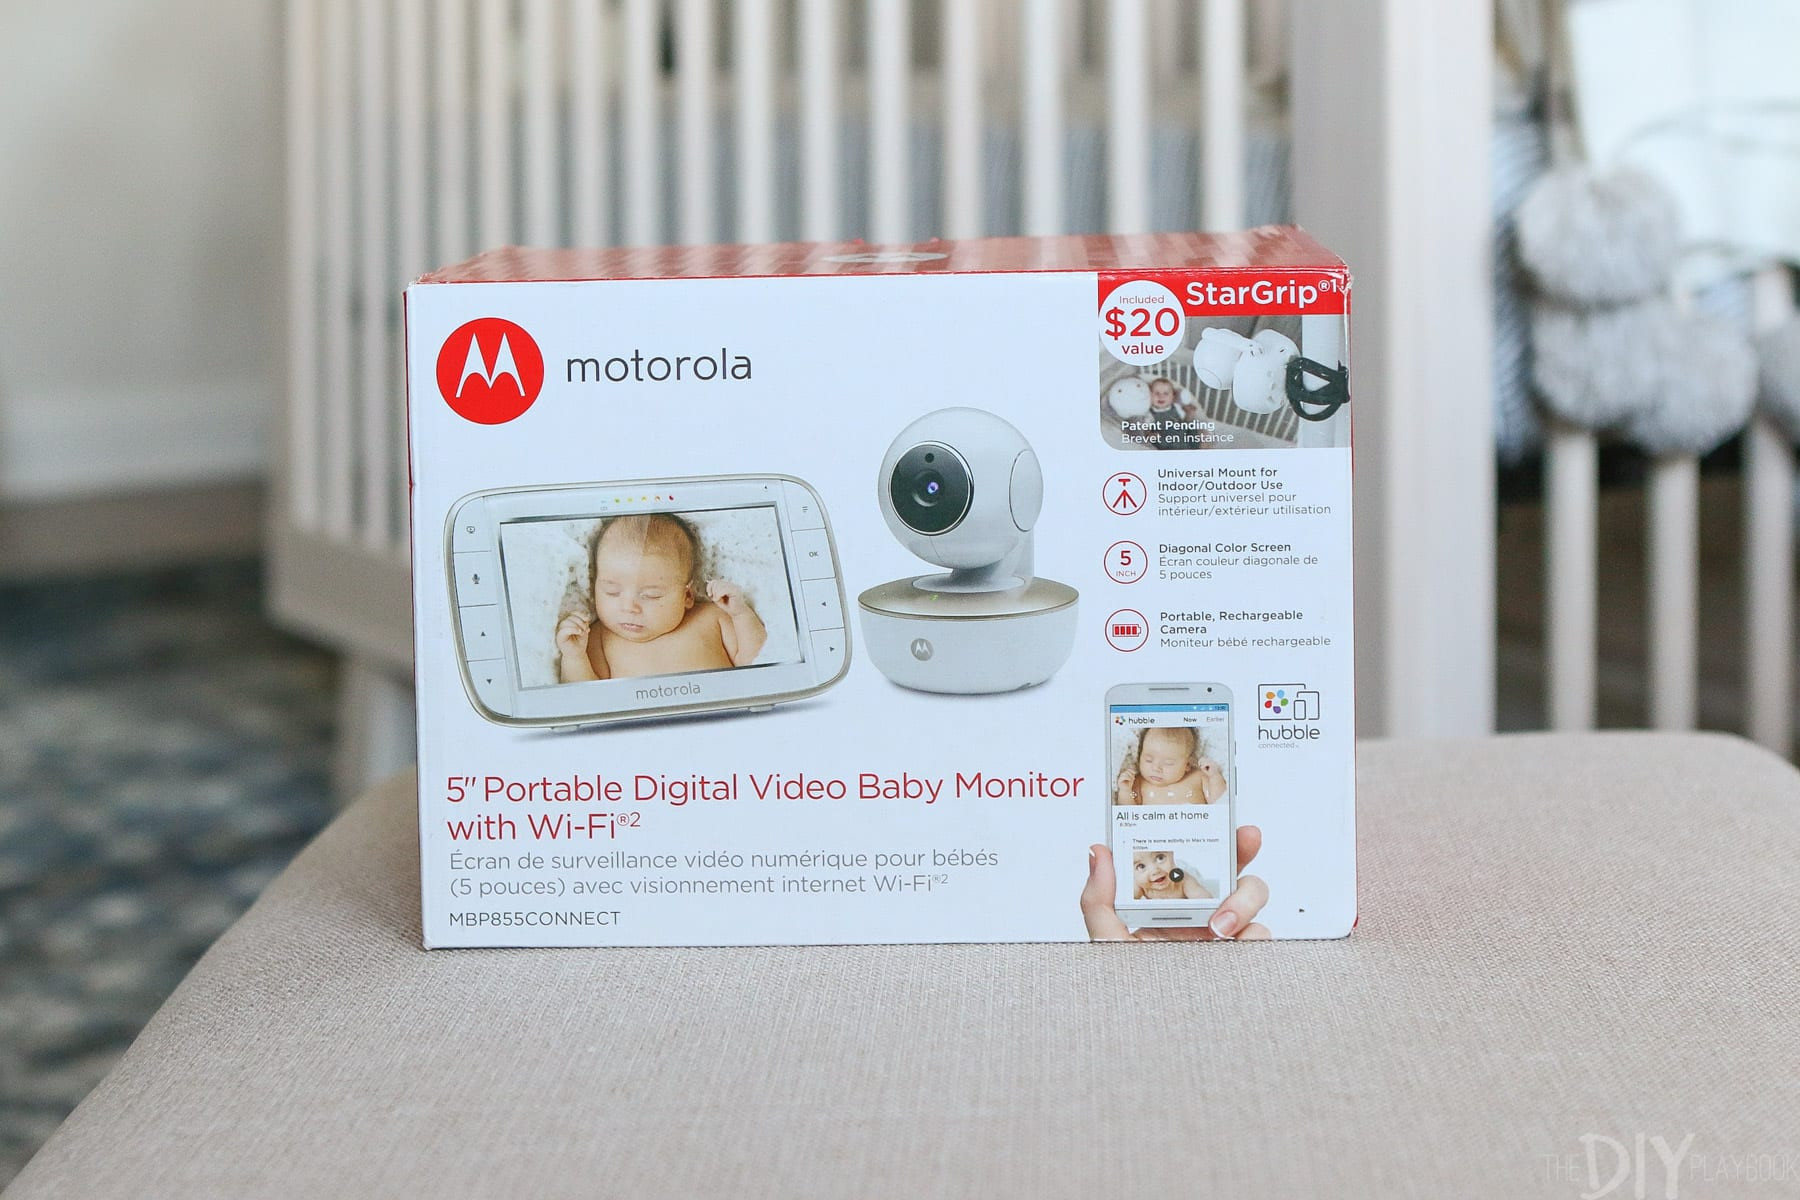 Best ideas about DIY Baby Monitor
. Save or Pin How to Mount a Baby Monitor and Hide the Cords The DIY Now.